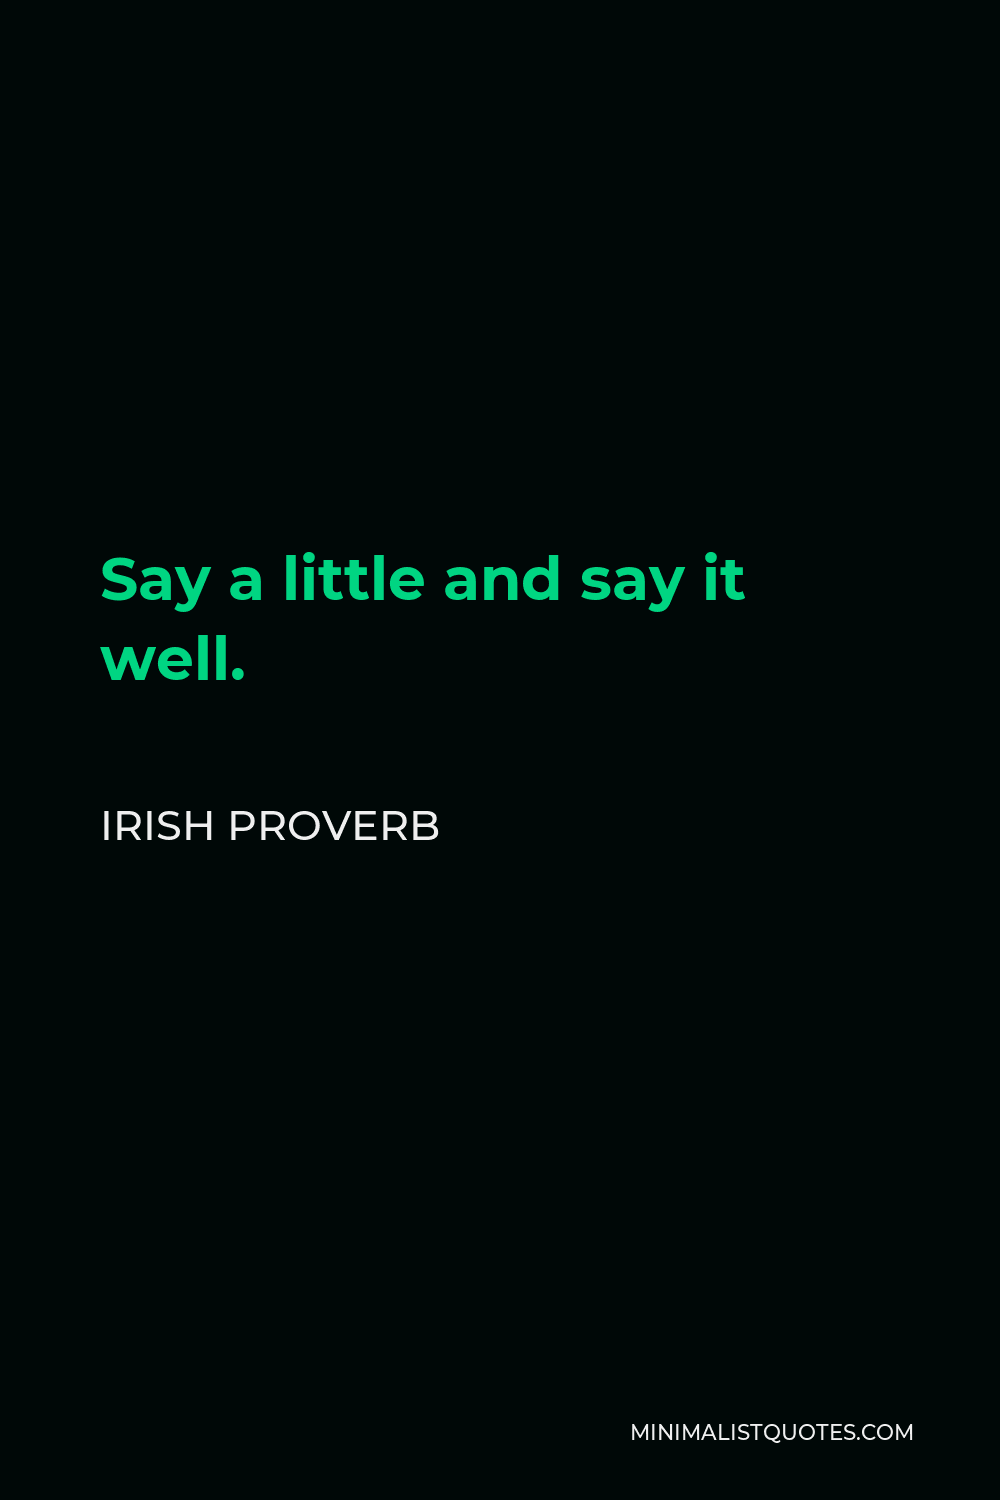 Irish Proverb Quote - Say a little and say it well.